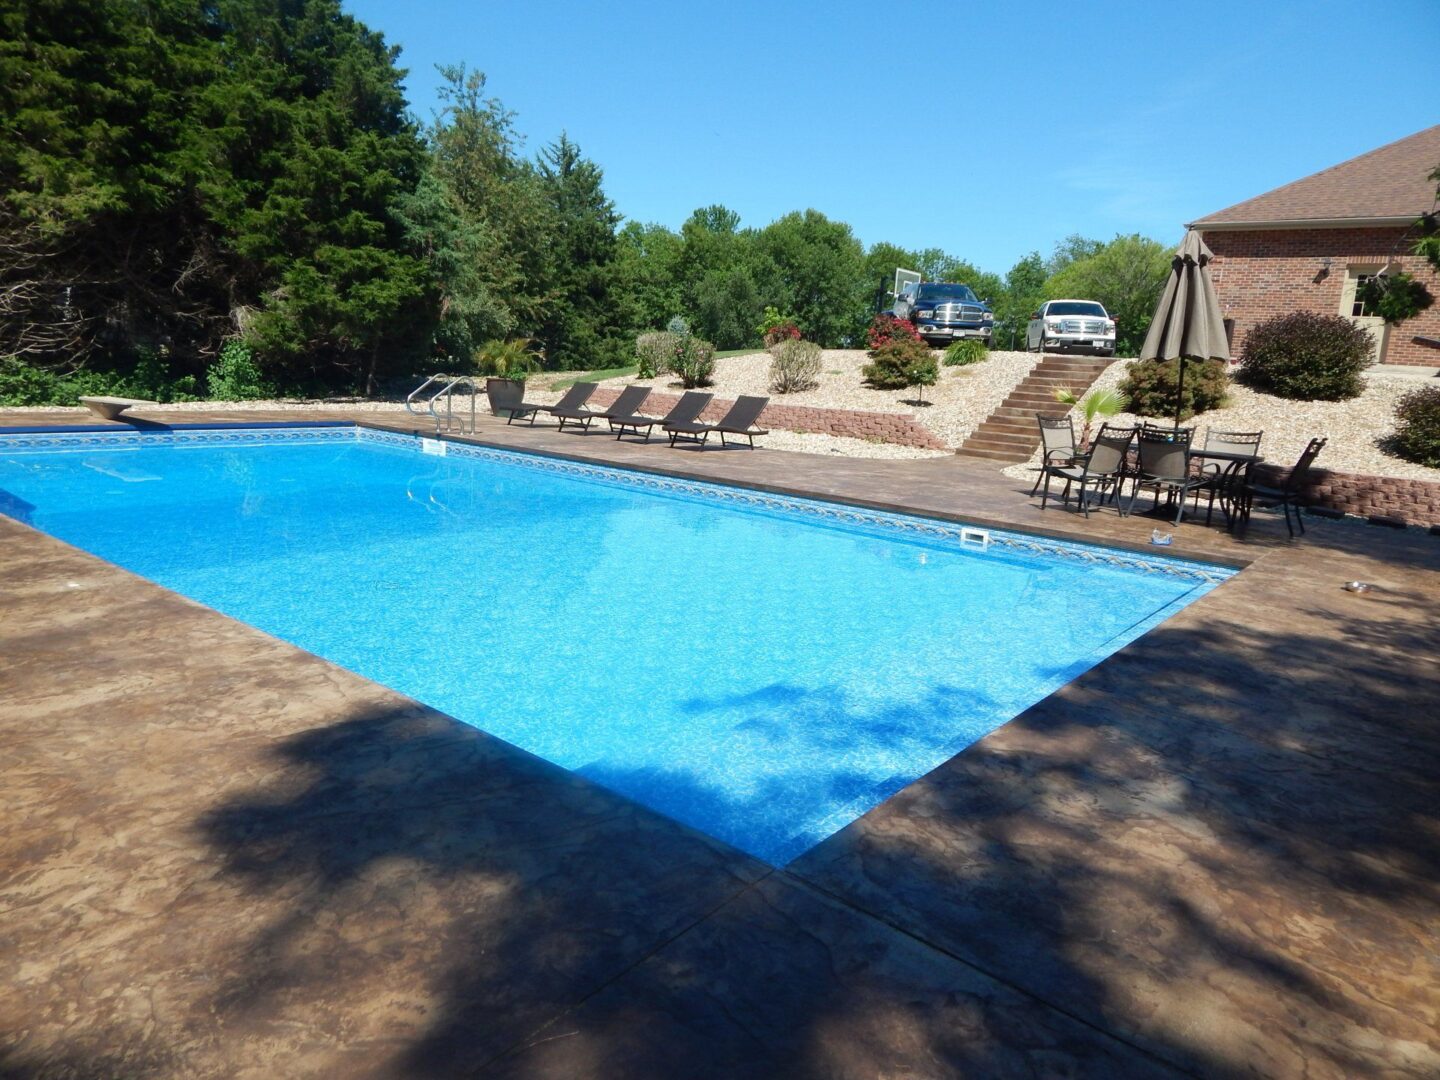 A wide view of an outdoor pool